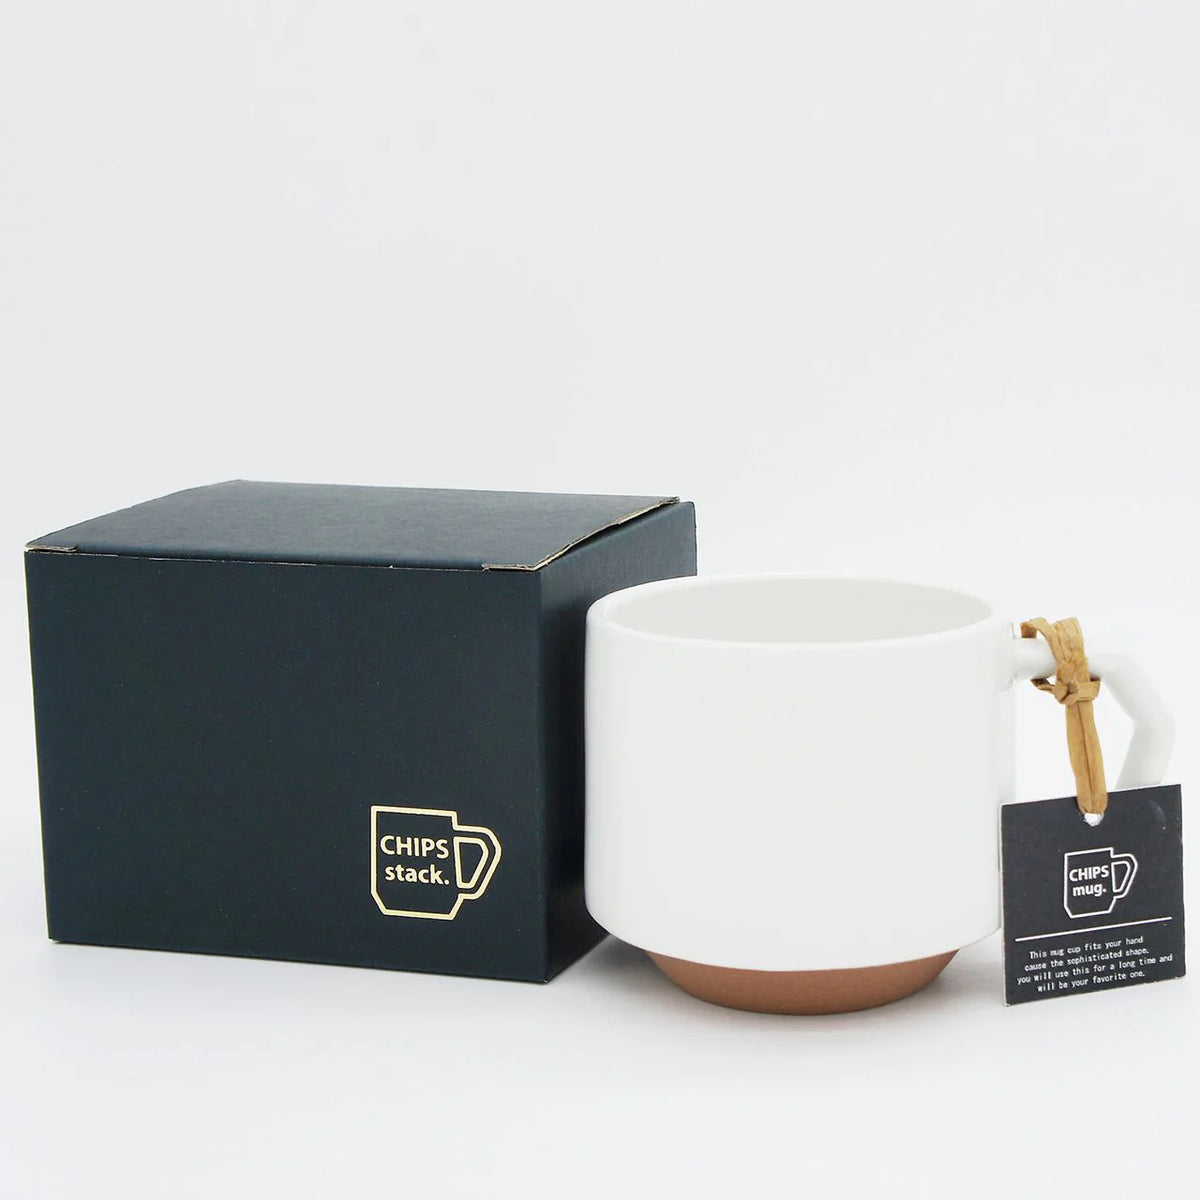 A CHIPS Inc. Stacking Mug – White next to a black box, showcasing its functionality.